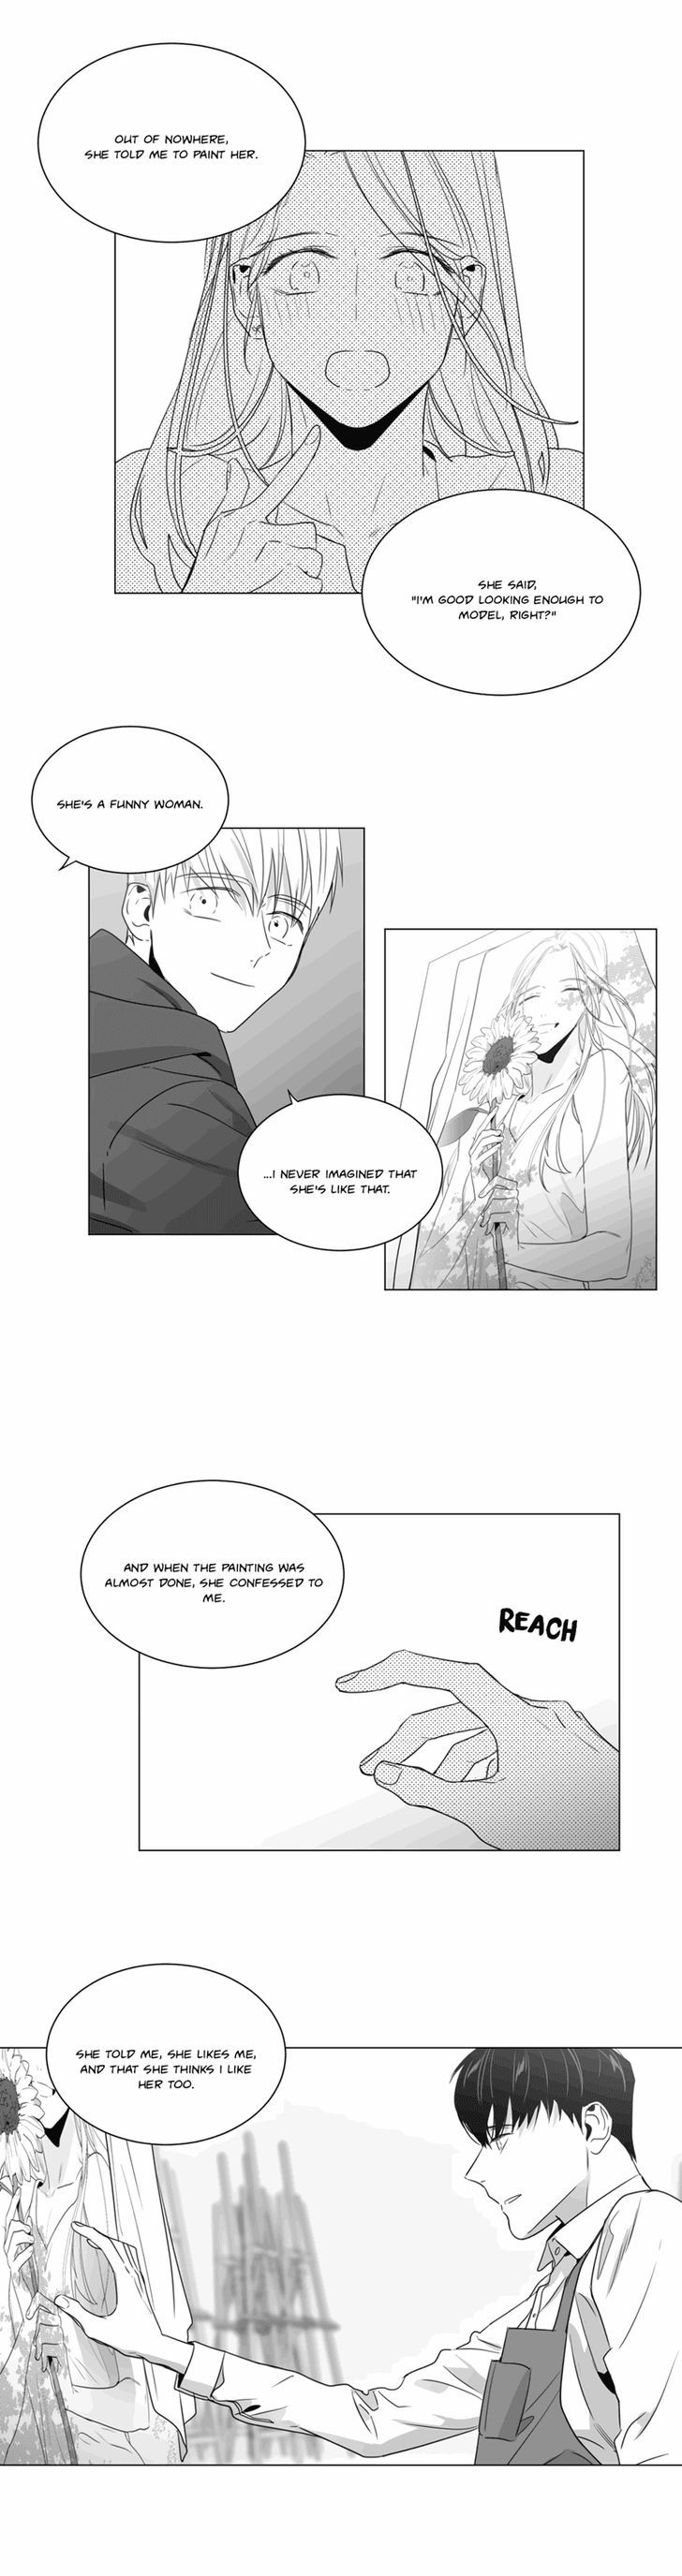 Lover Boy (Lezhin) Chapter 035 page 12